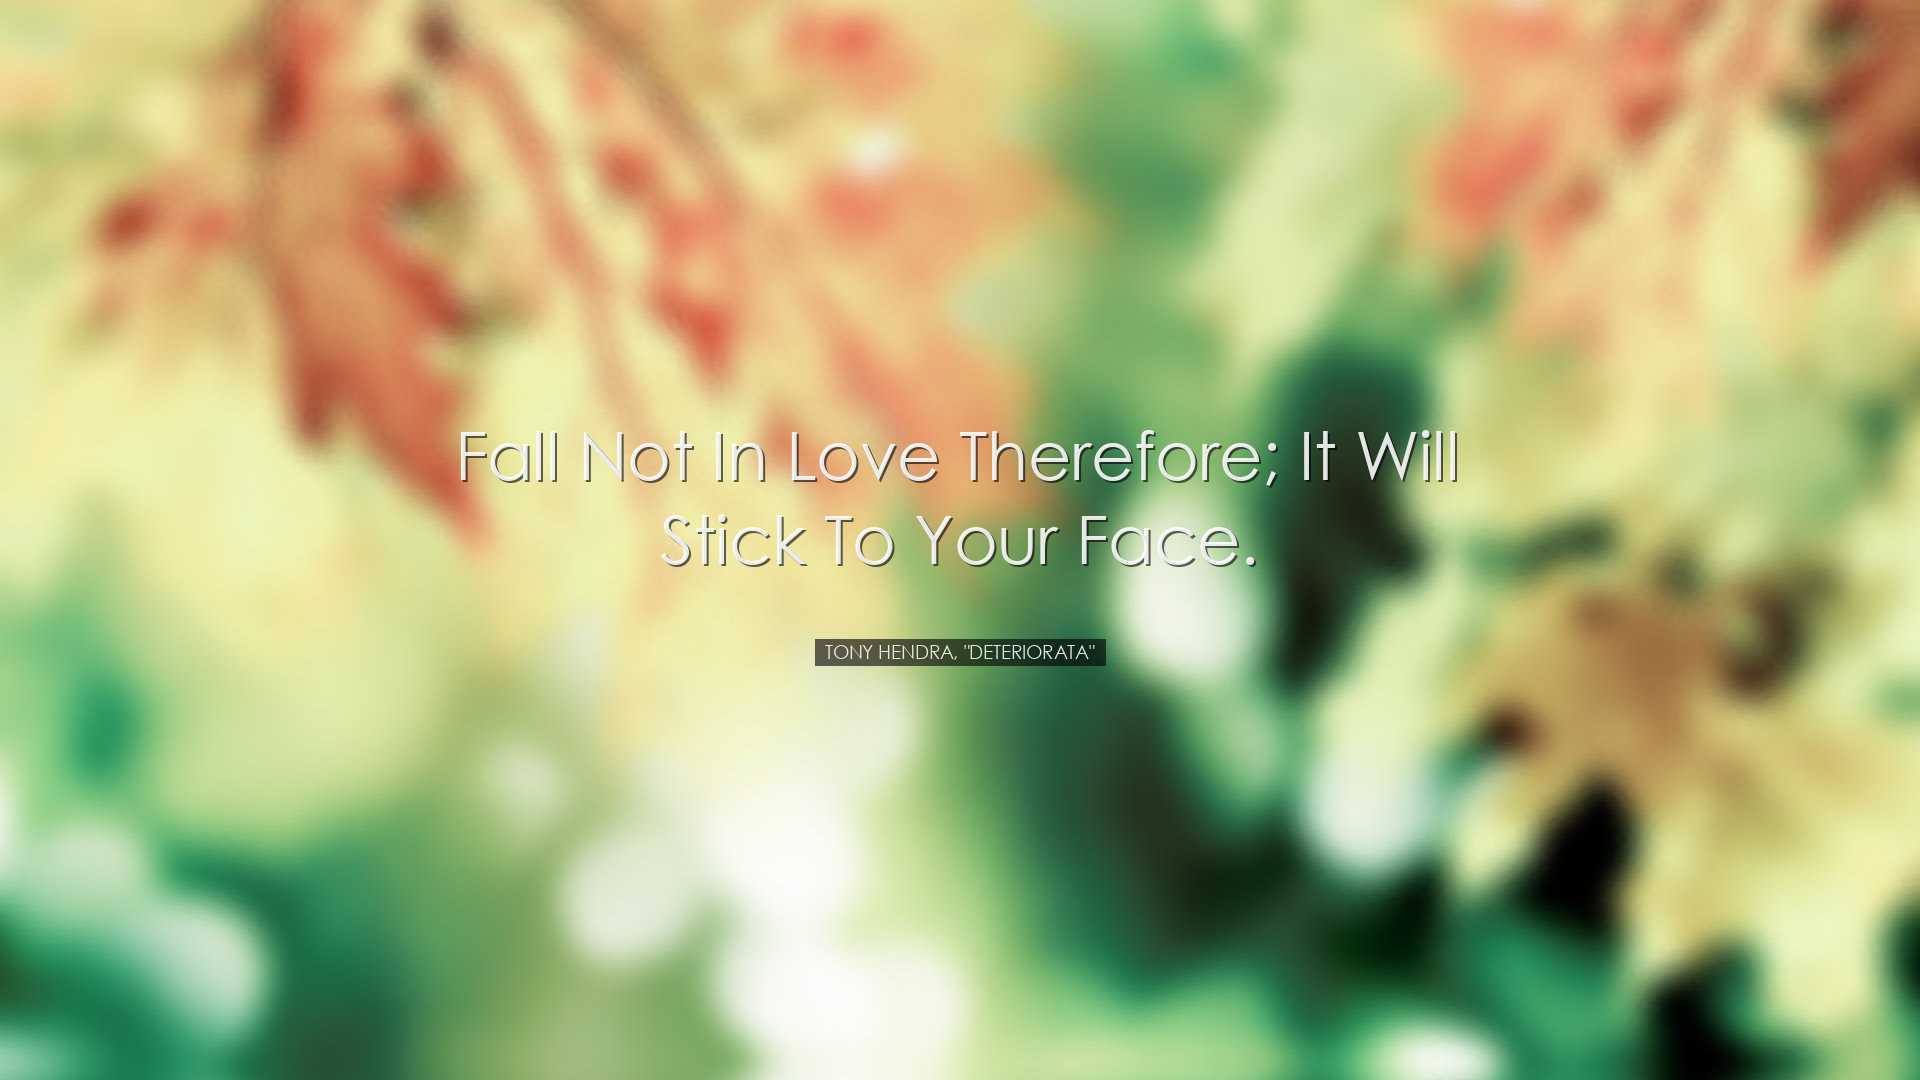 Fall not in love therefore; it will stick to your face. - Tony Hen